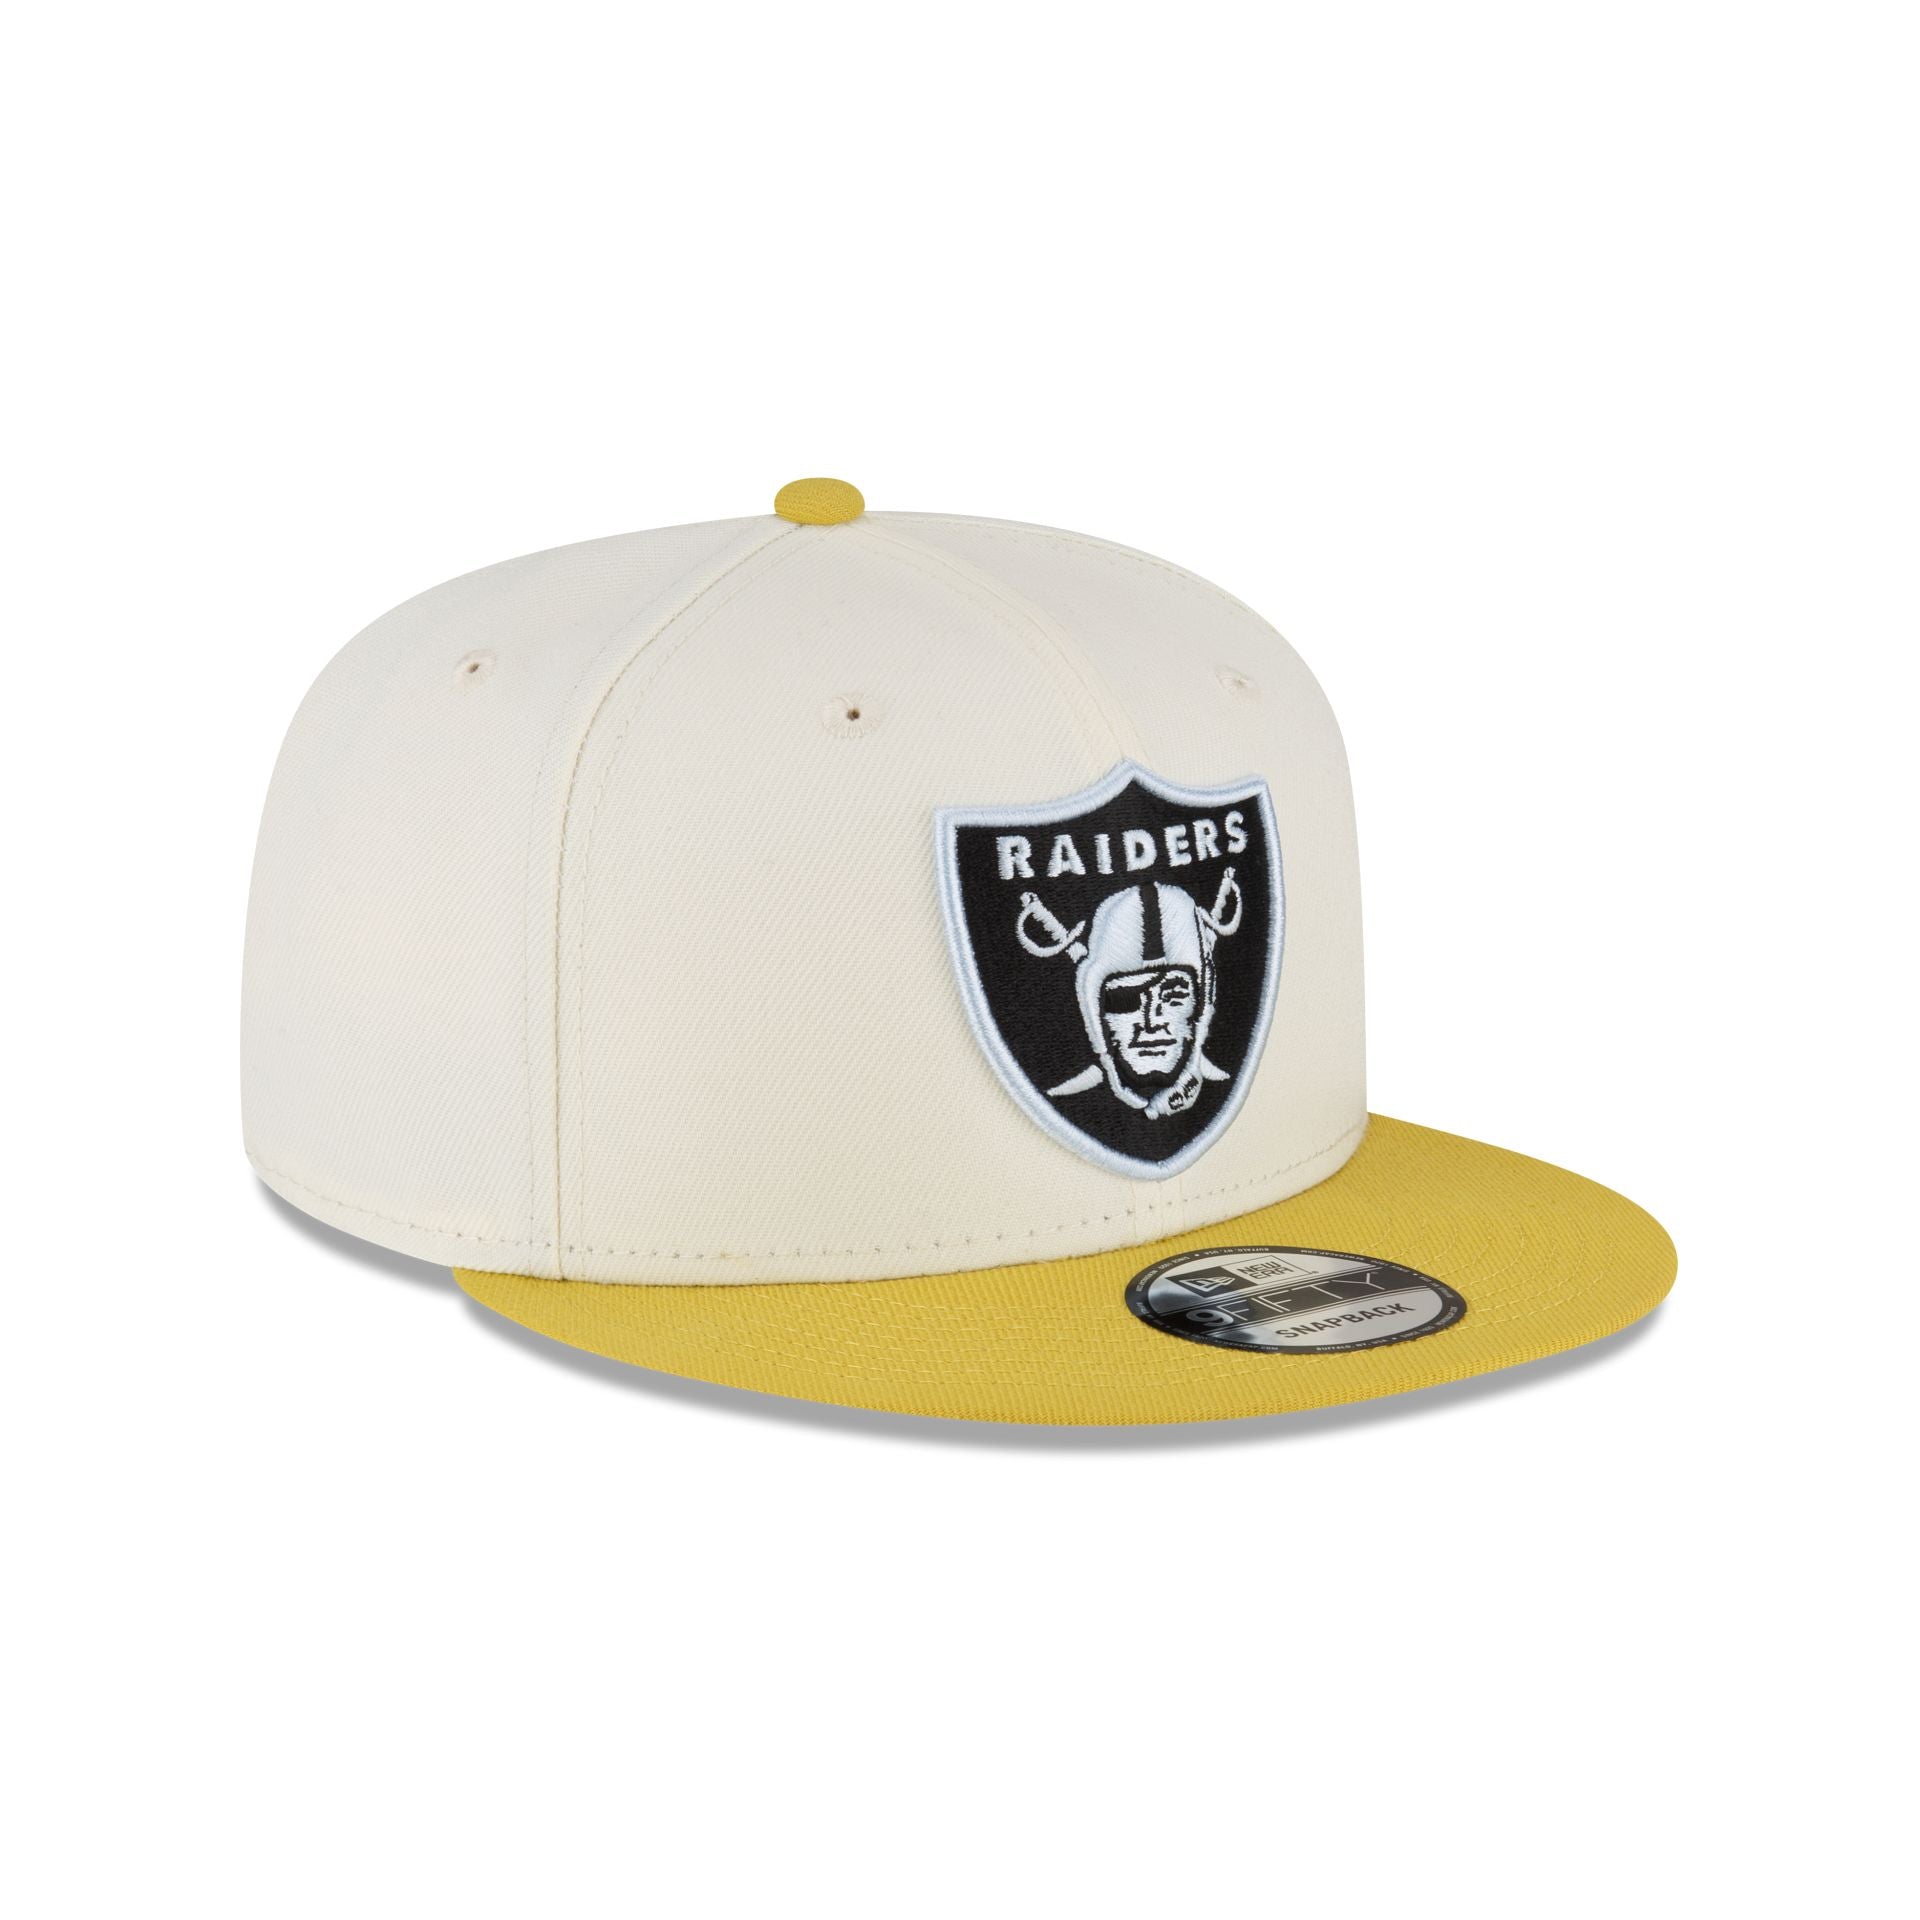 Las Vegas Raiders Chartreuse Visor 59FIFTY Fitted Hat, Black - Size: 7 3/8, NFL by New Era